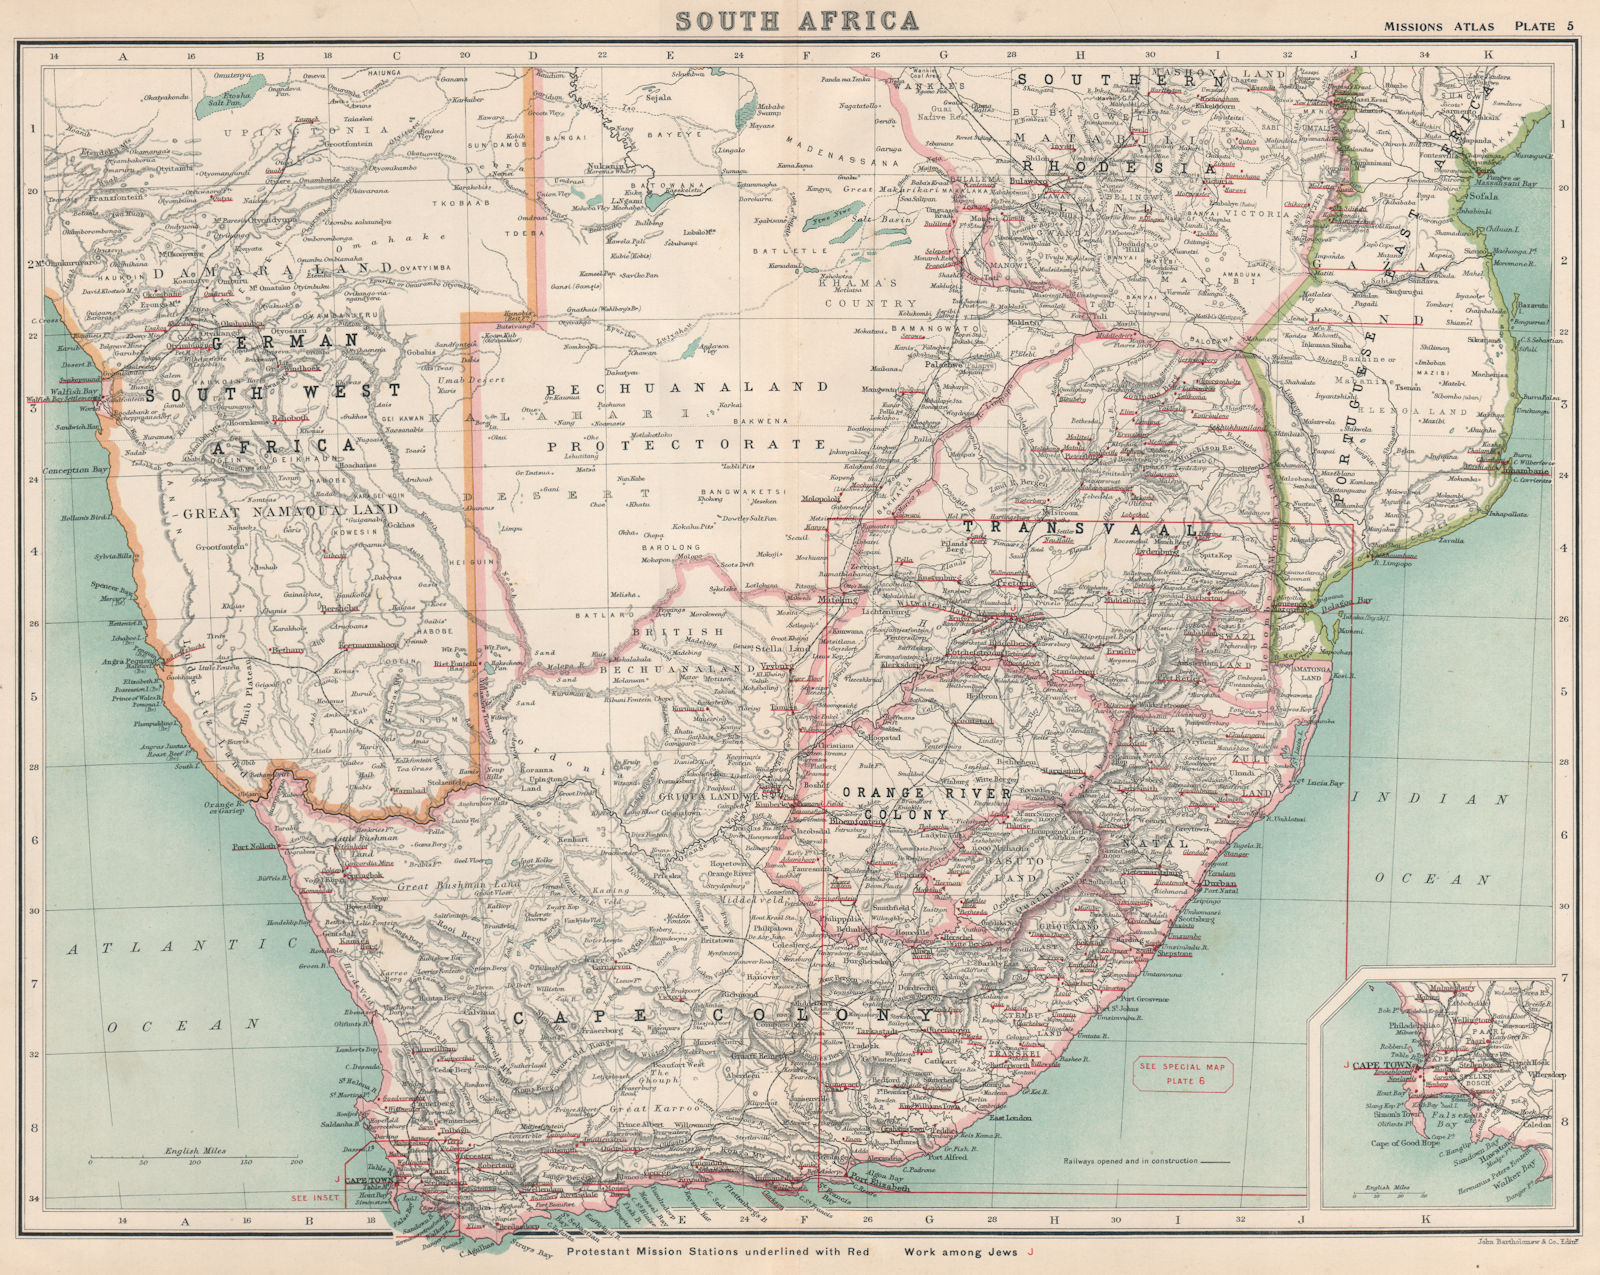 SOUTHERN AFRICA PROTESTANT MISSIONS. Namibia Rhodesia Bechuanaland 1911 map